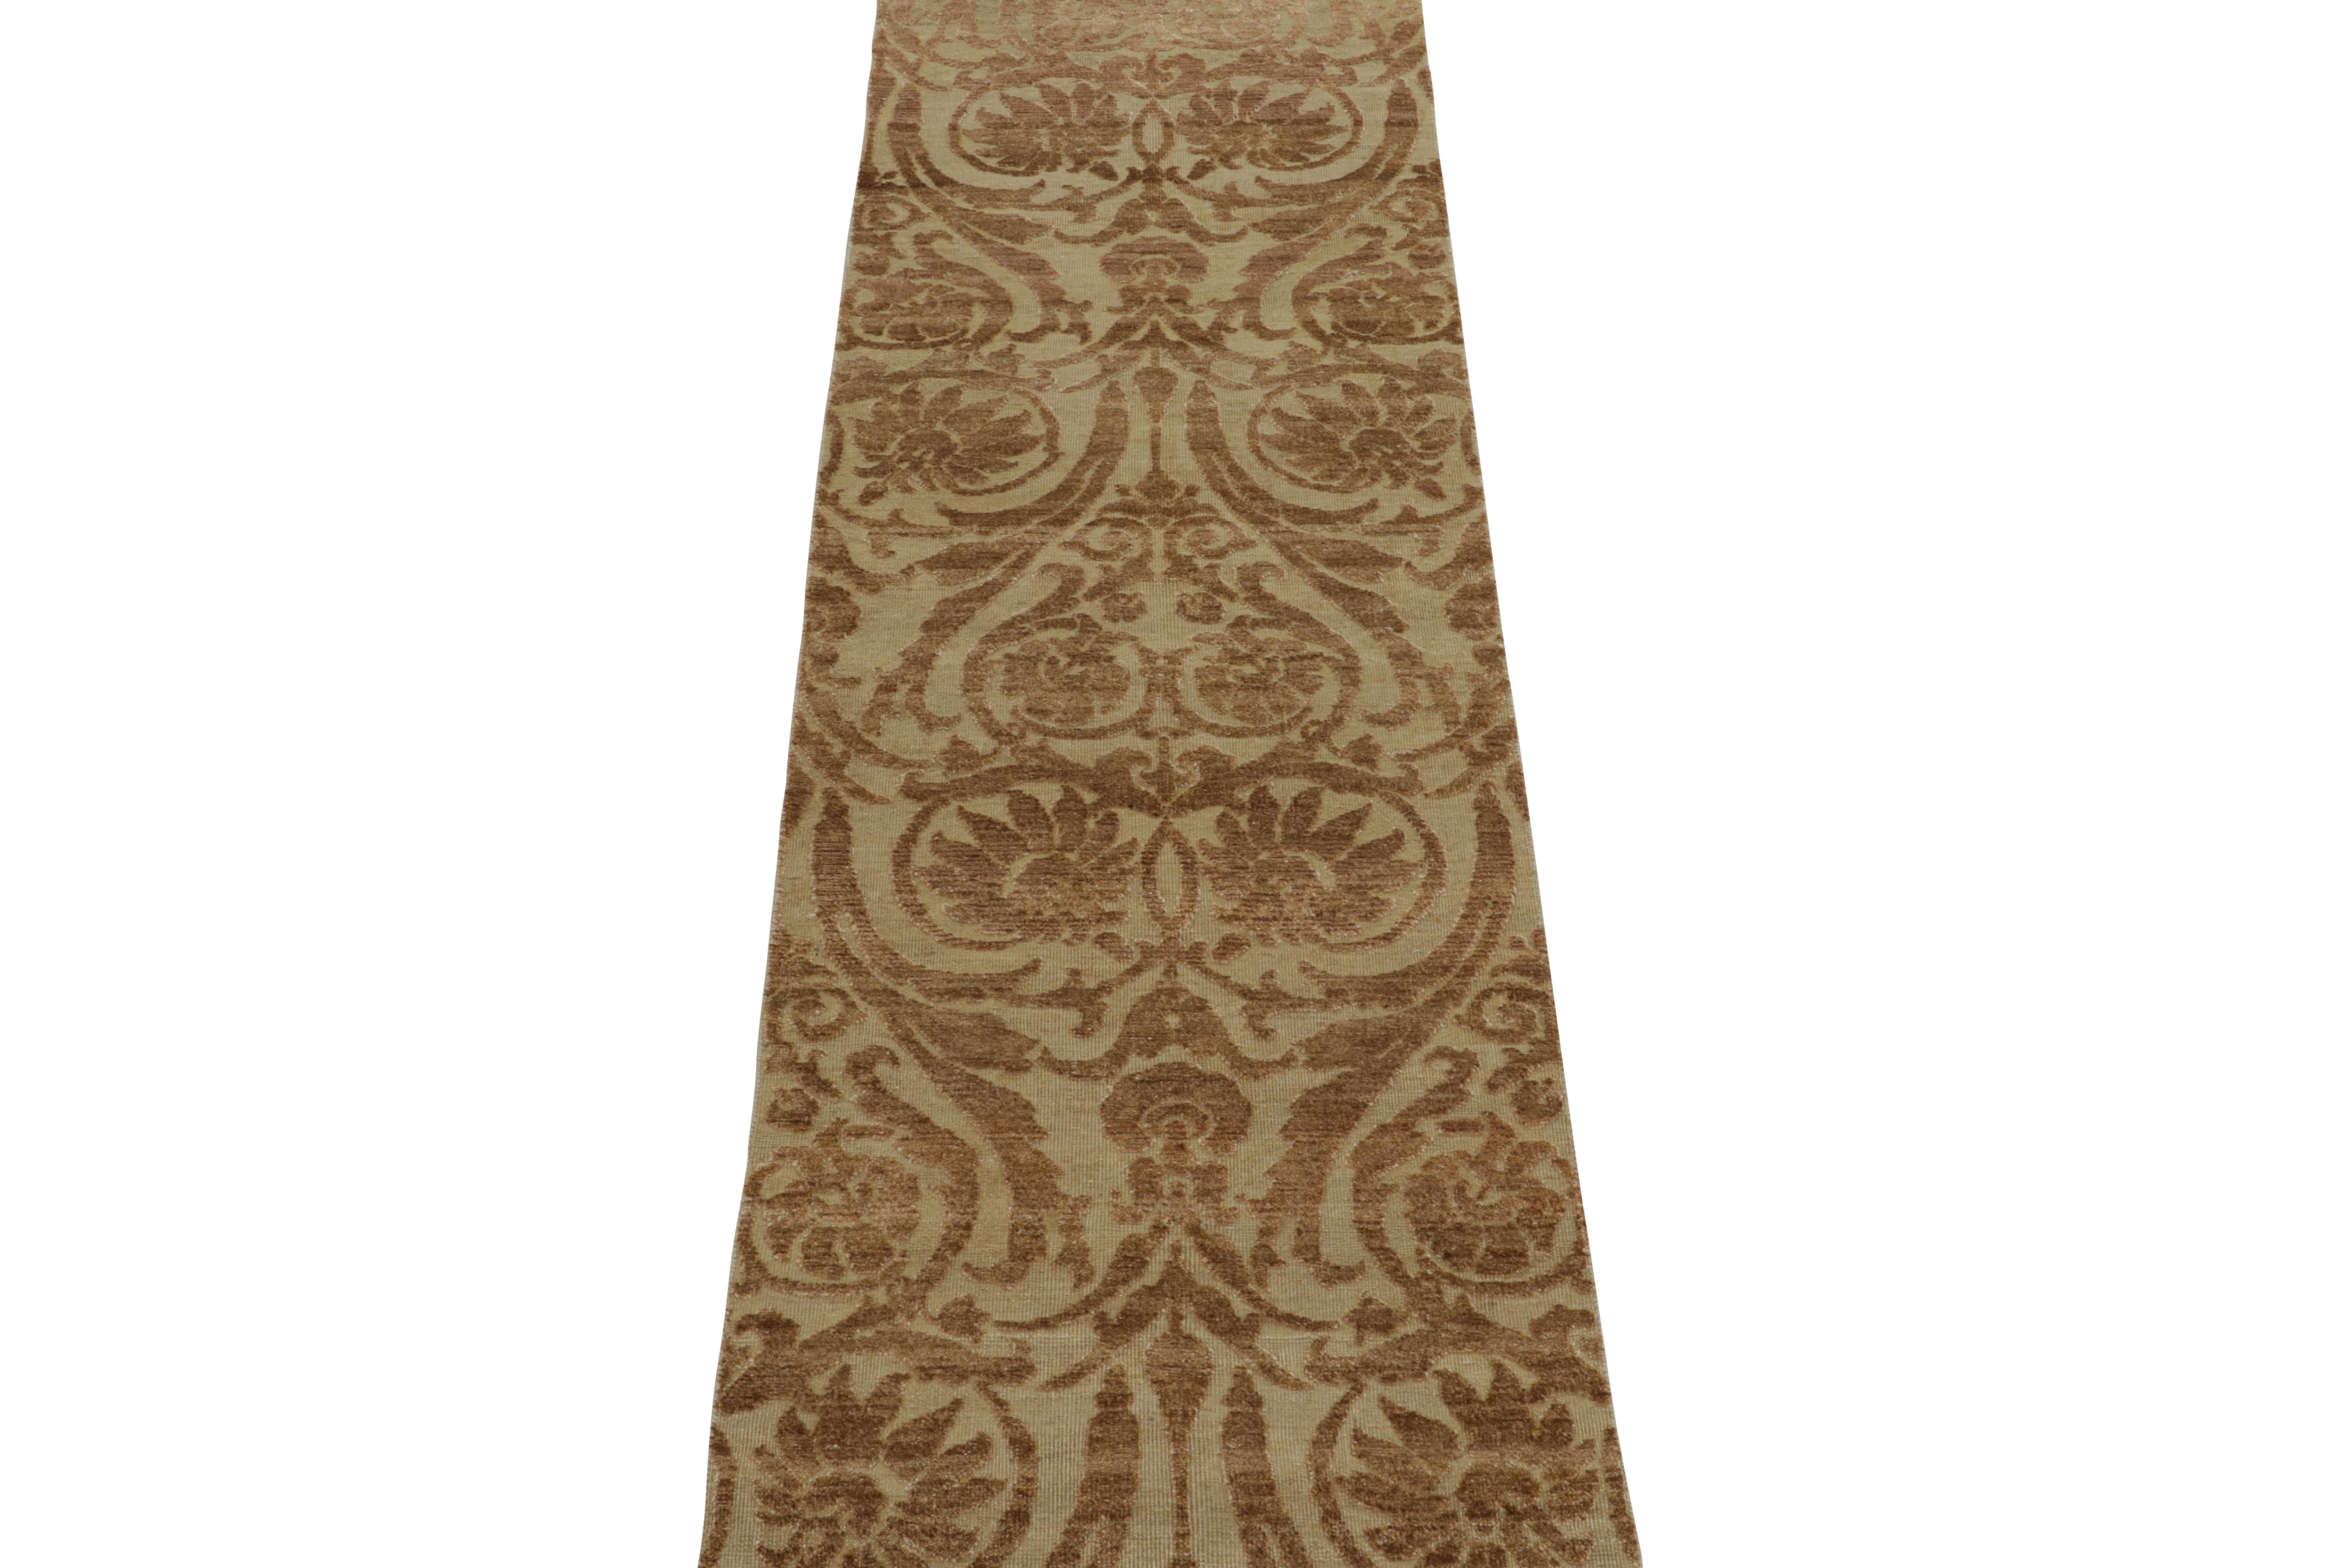 Indian Rug & Kilim’s European style Runners in Beige with Brown Floral Patterns For Sale